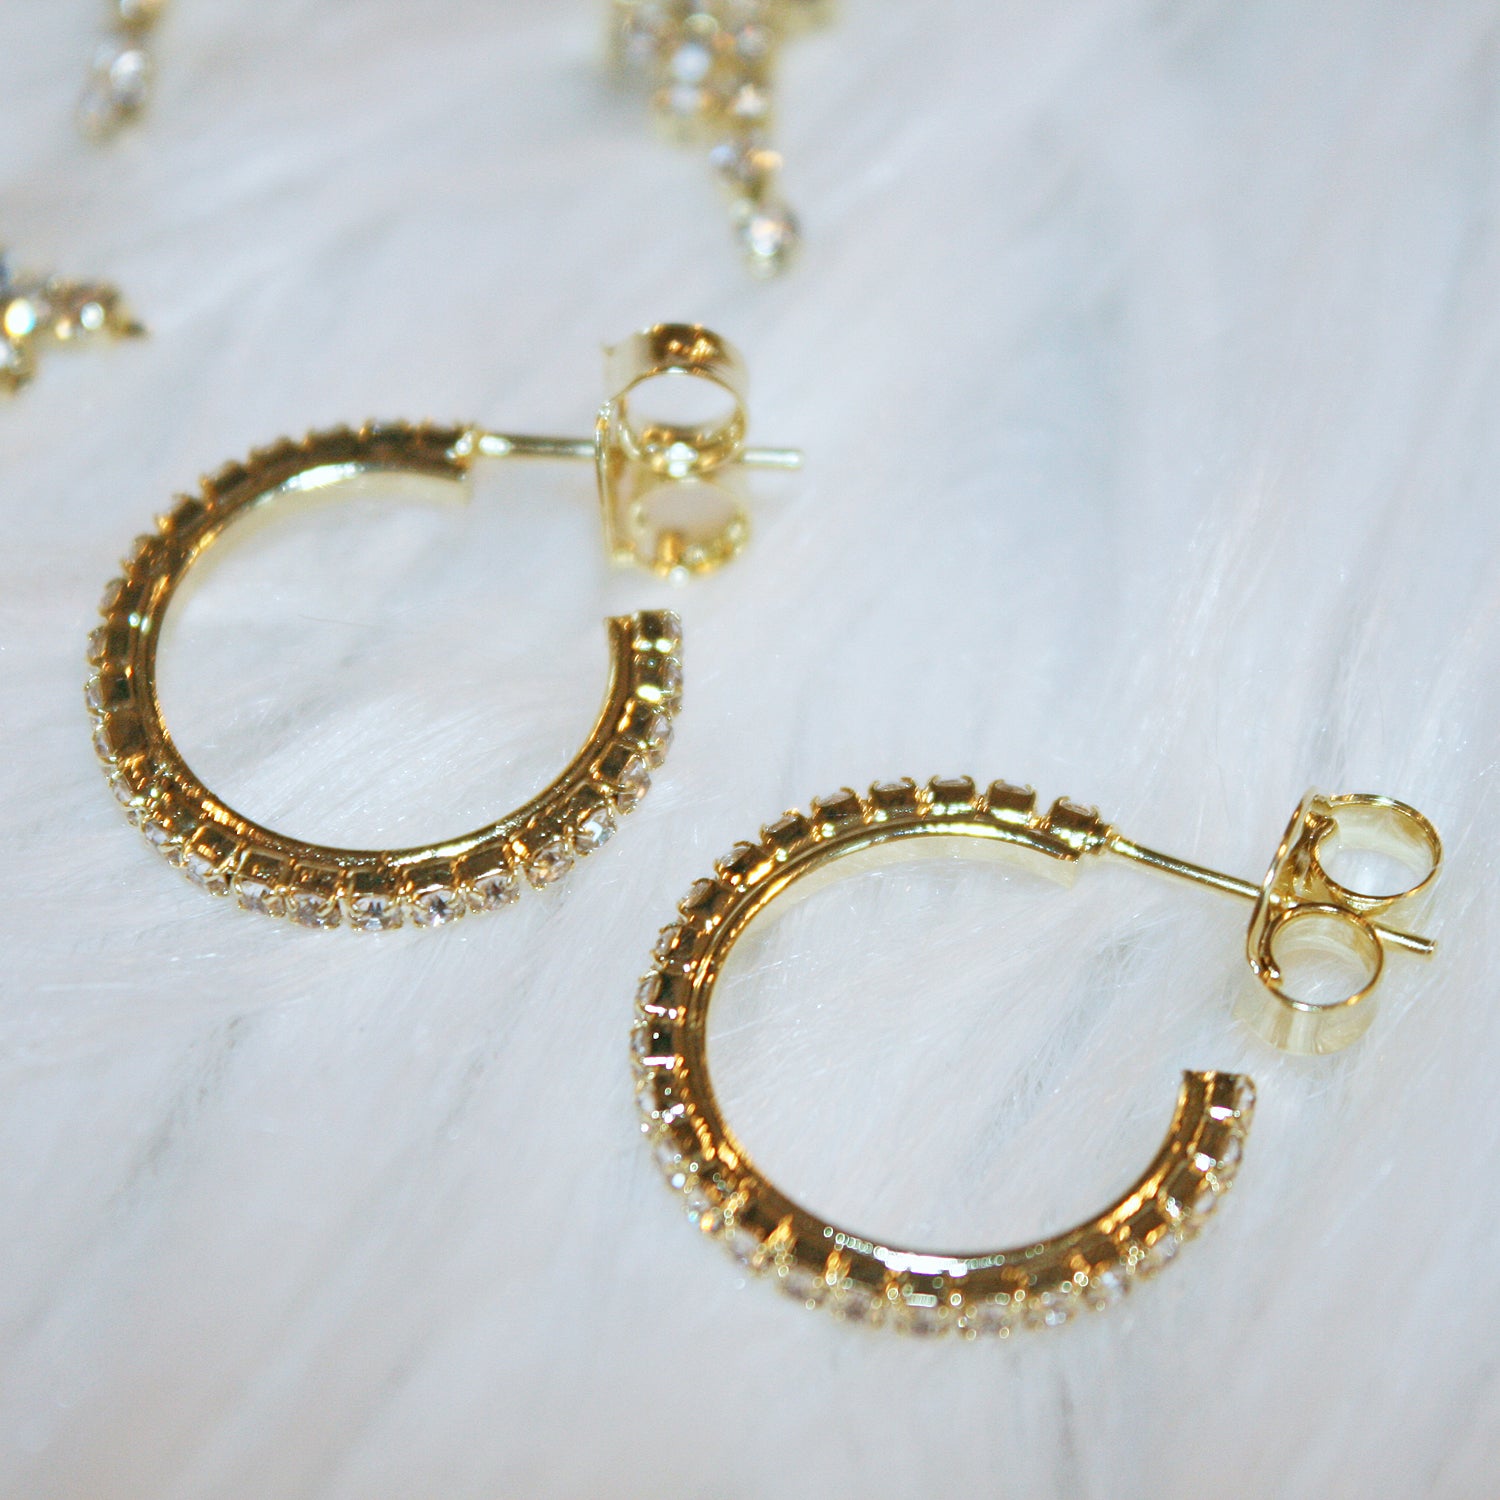 Sheila Fajl Gama Square Tube Hoop Earrings in CZ and Polished Gold Plated